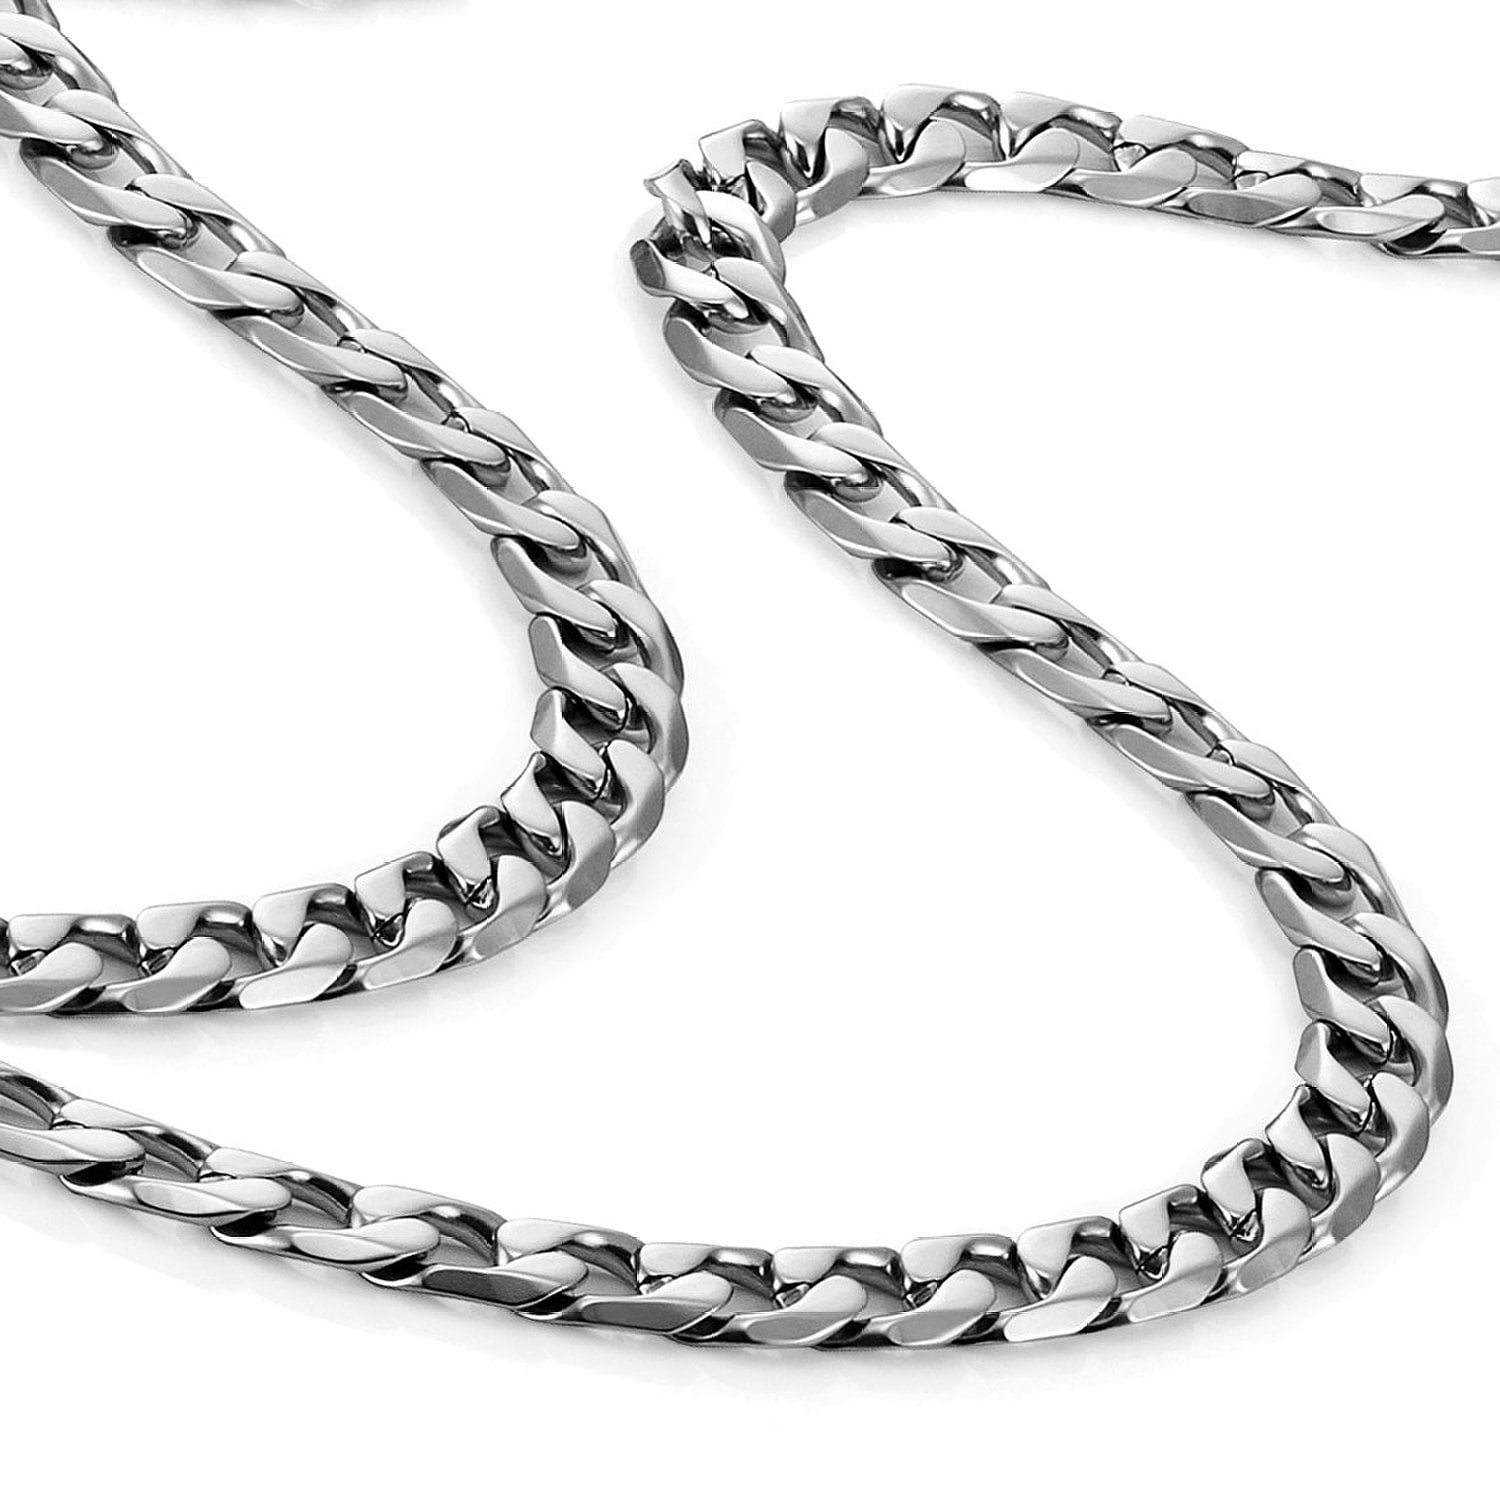 Urban Jewelry - Classic Mens Necklace 316L Stainless Steel Silver Chain Stainless Steel Chain Necklace For Men